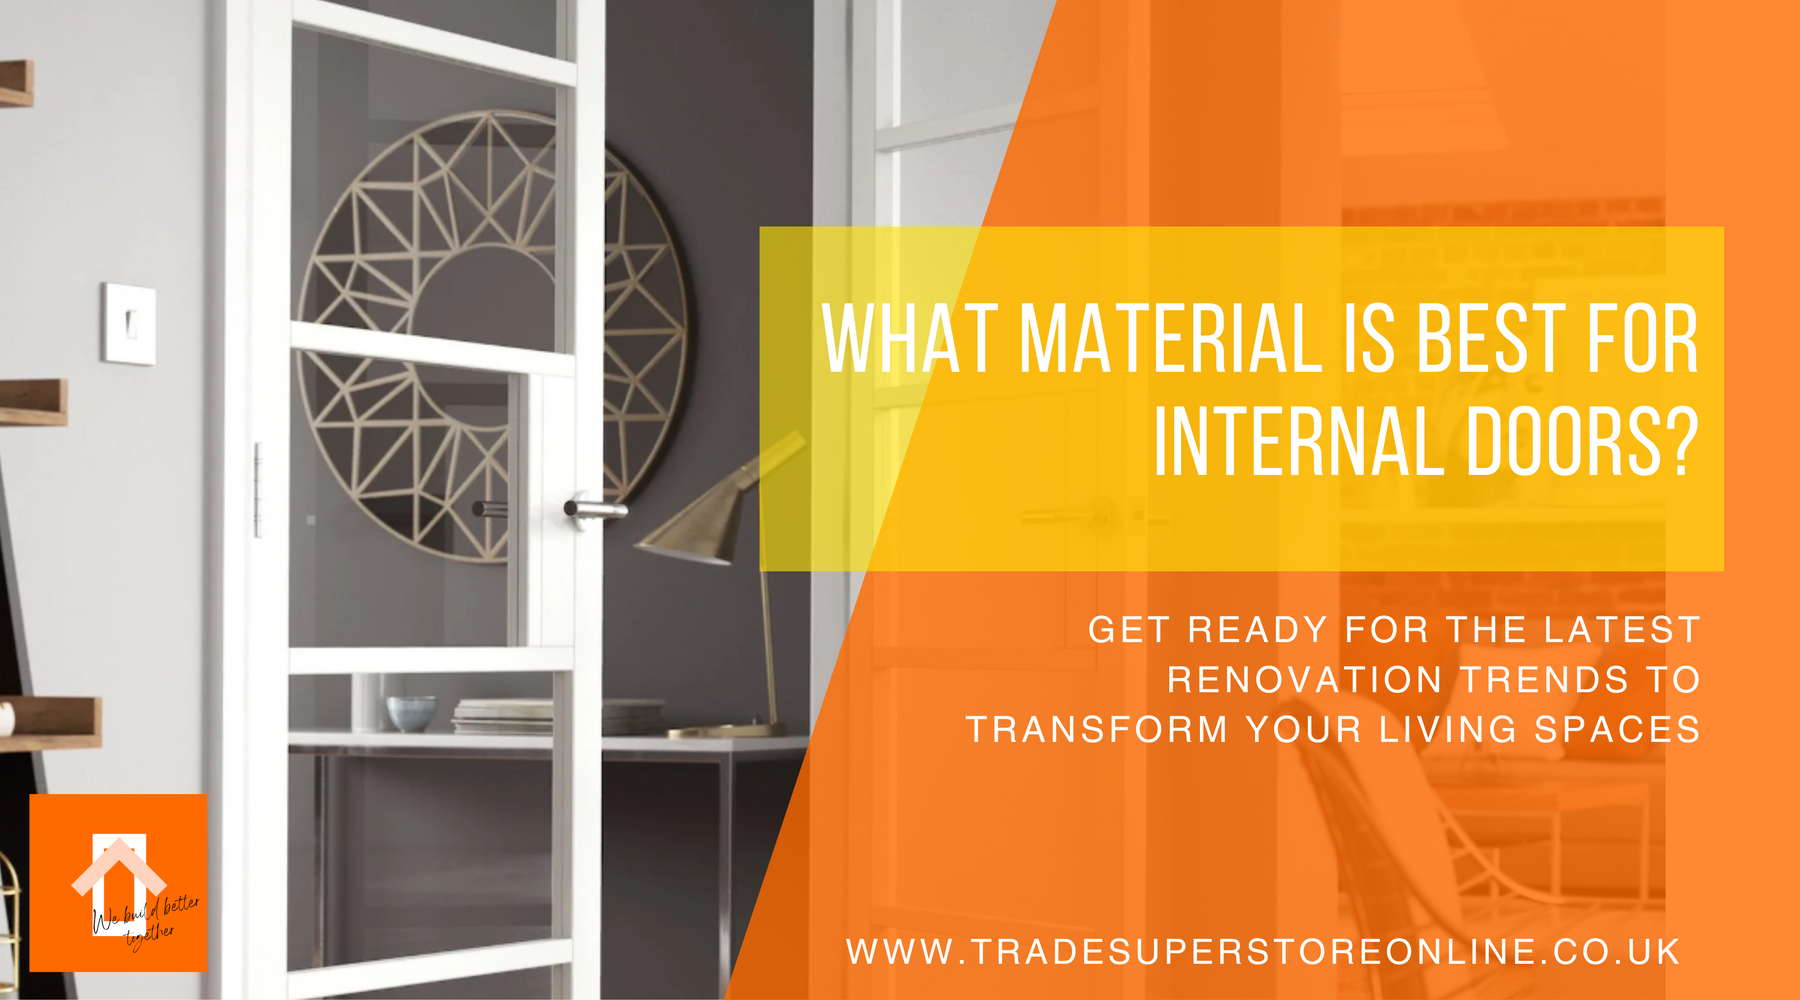 What Material Is Best for Internal Doors?